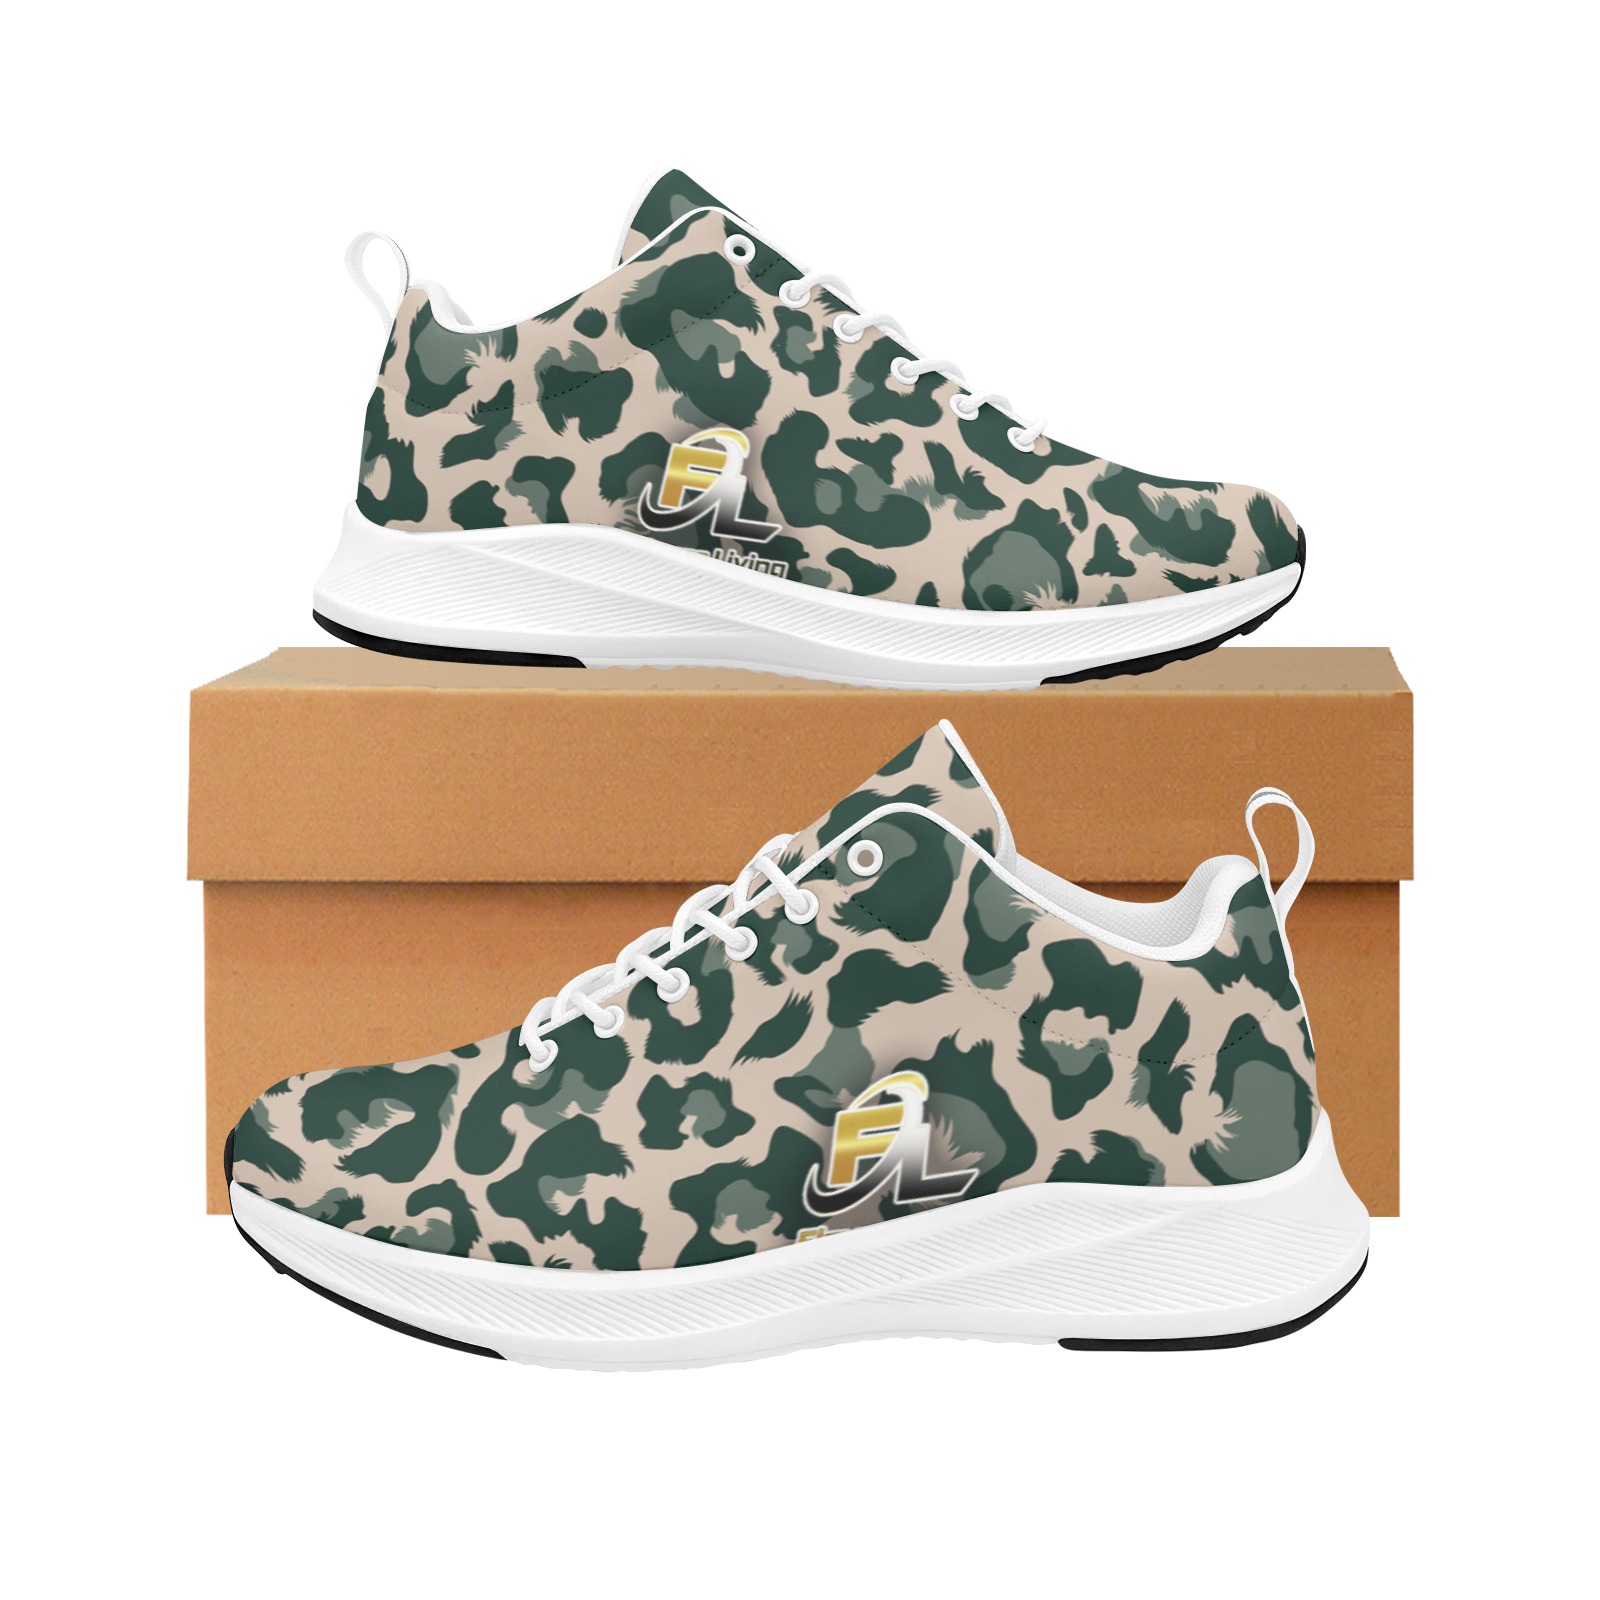 Camouflage Green Women's Alpha Running Shoes (Model 10093)